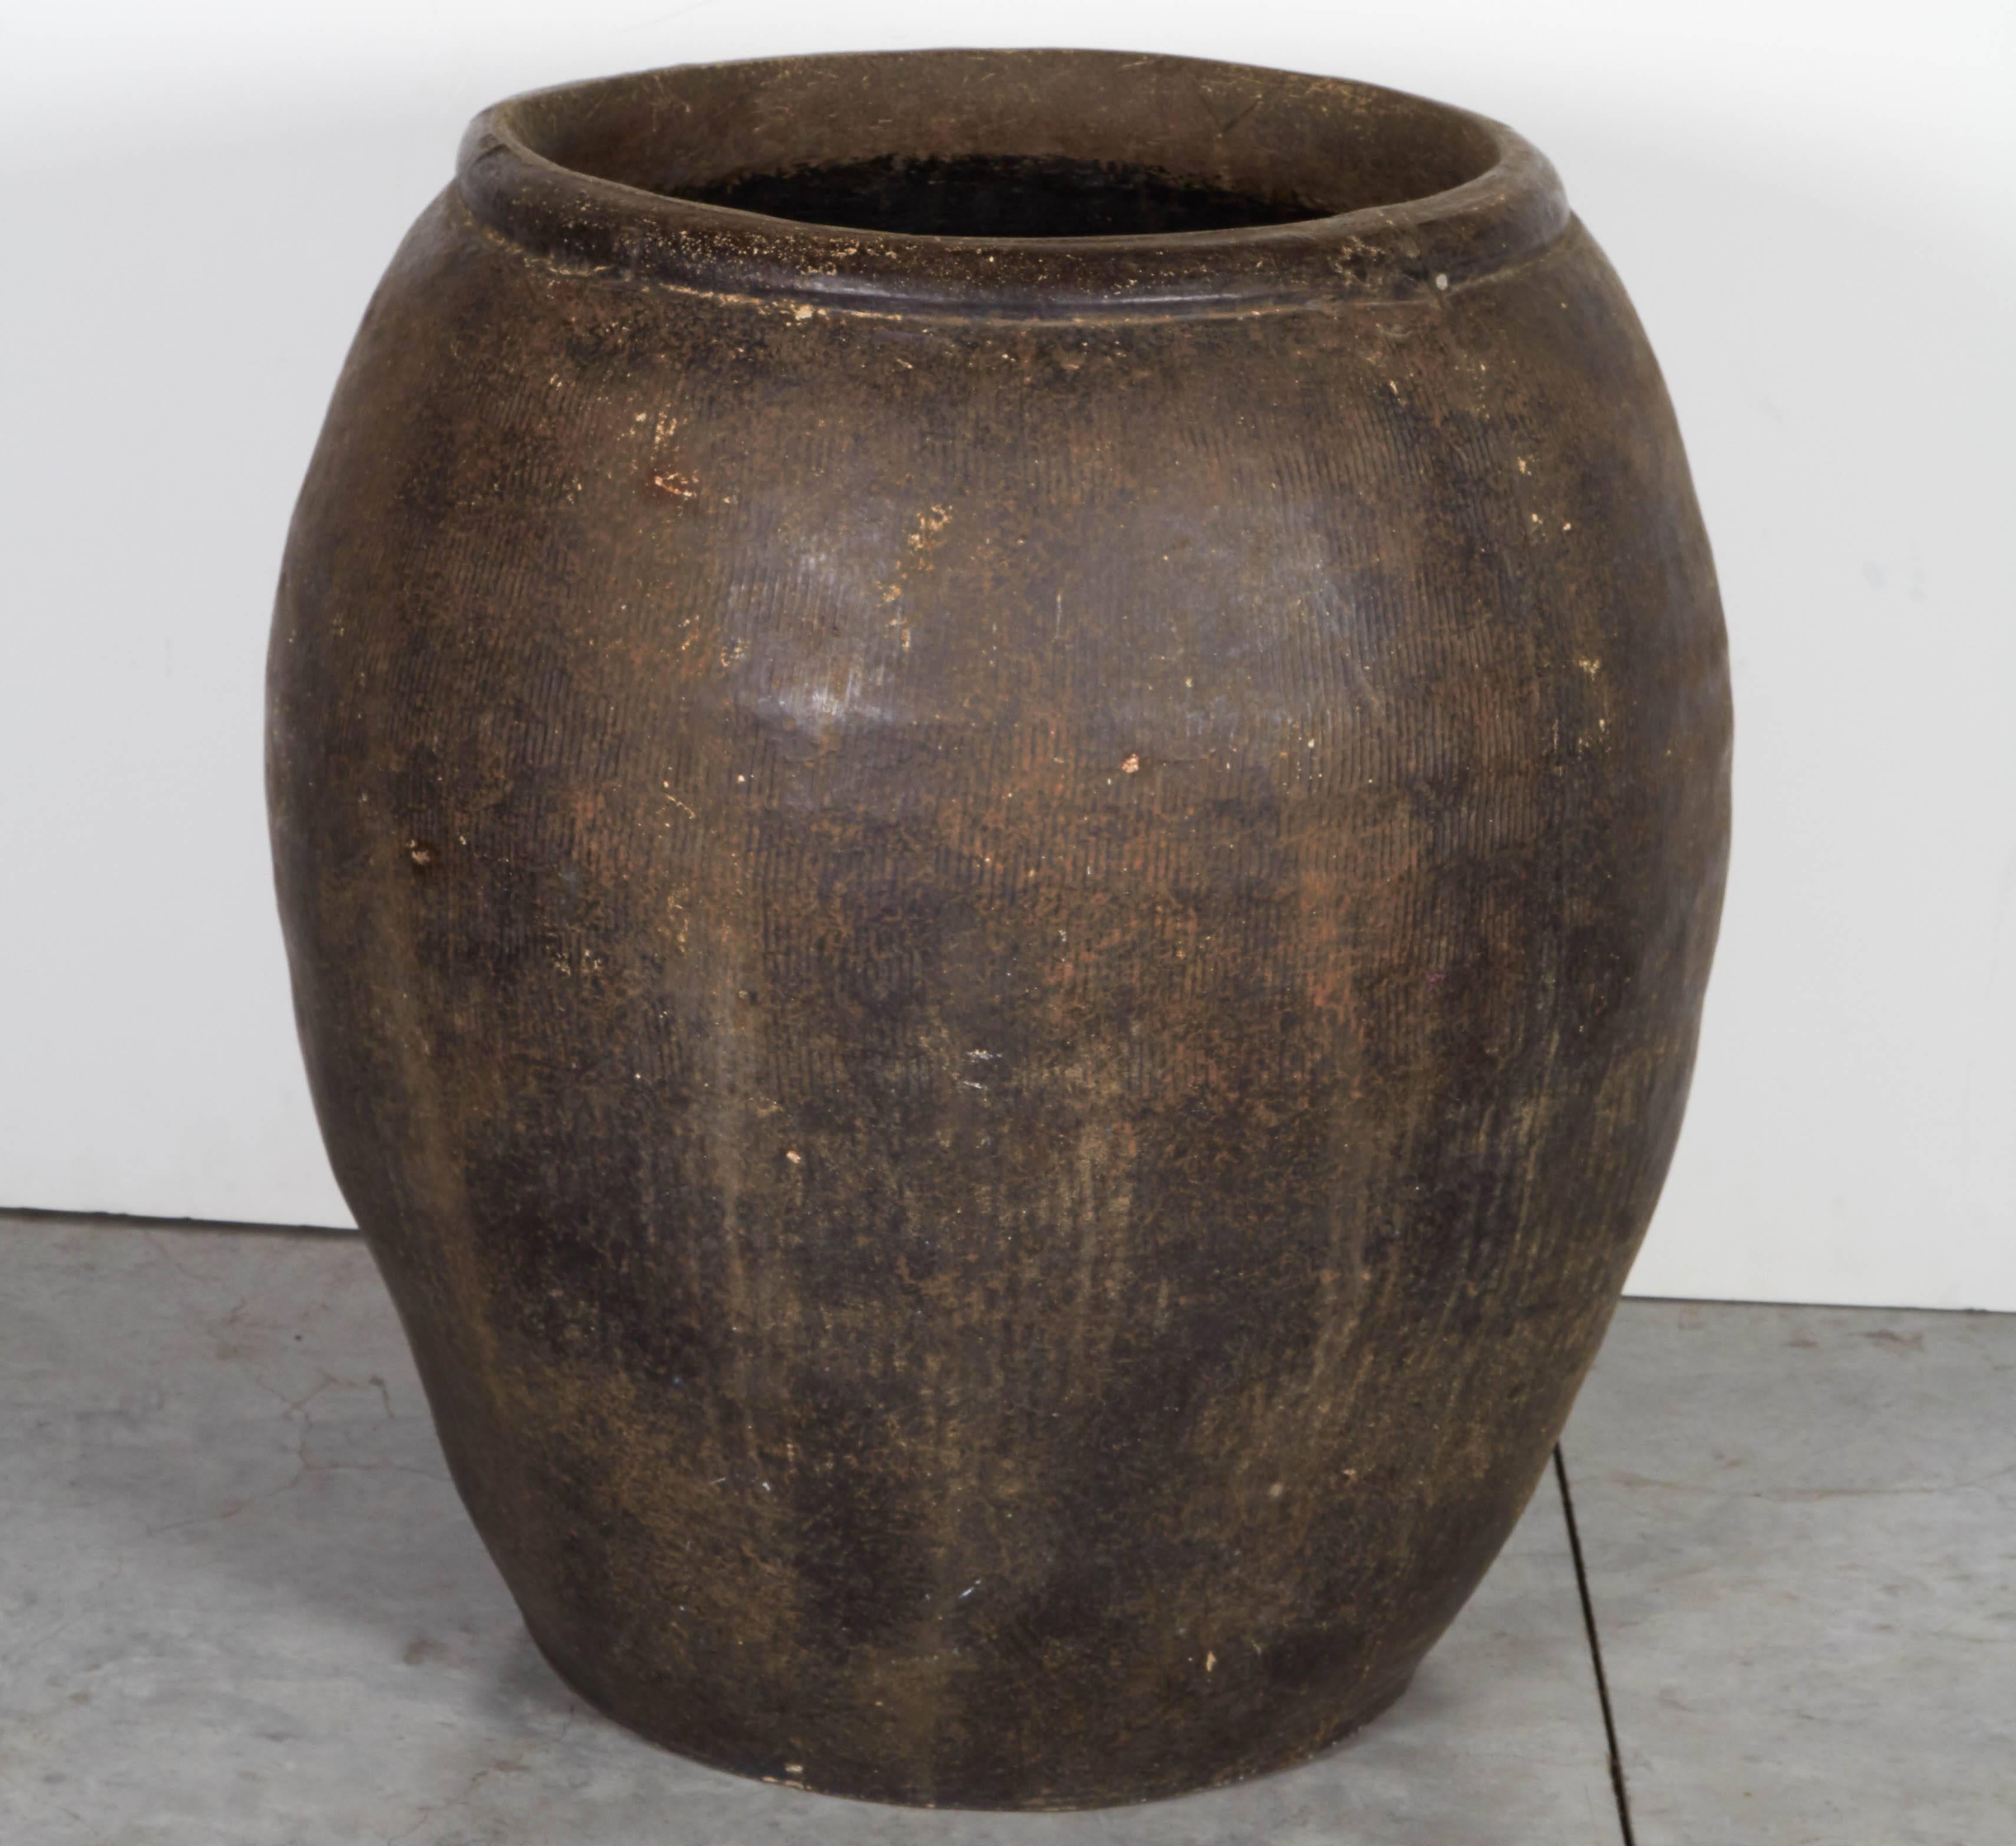 A large, wide and heavy vintage clay jar from Thailand with attractive embossing and a small drainage hole at the bottom. This piece has a strong presence and great functionality.
